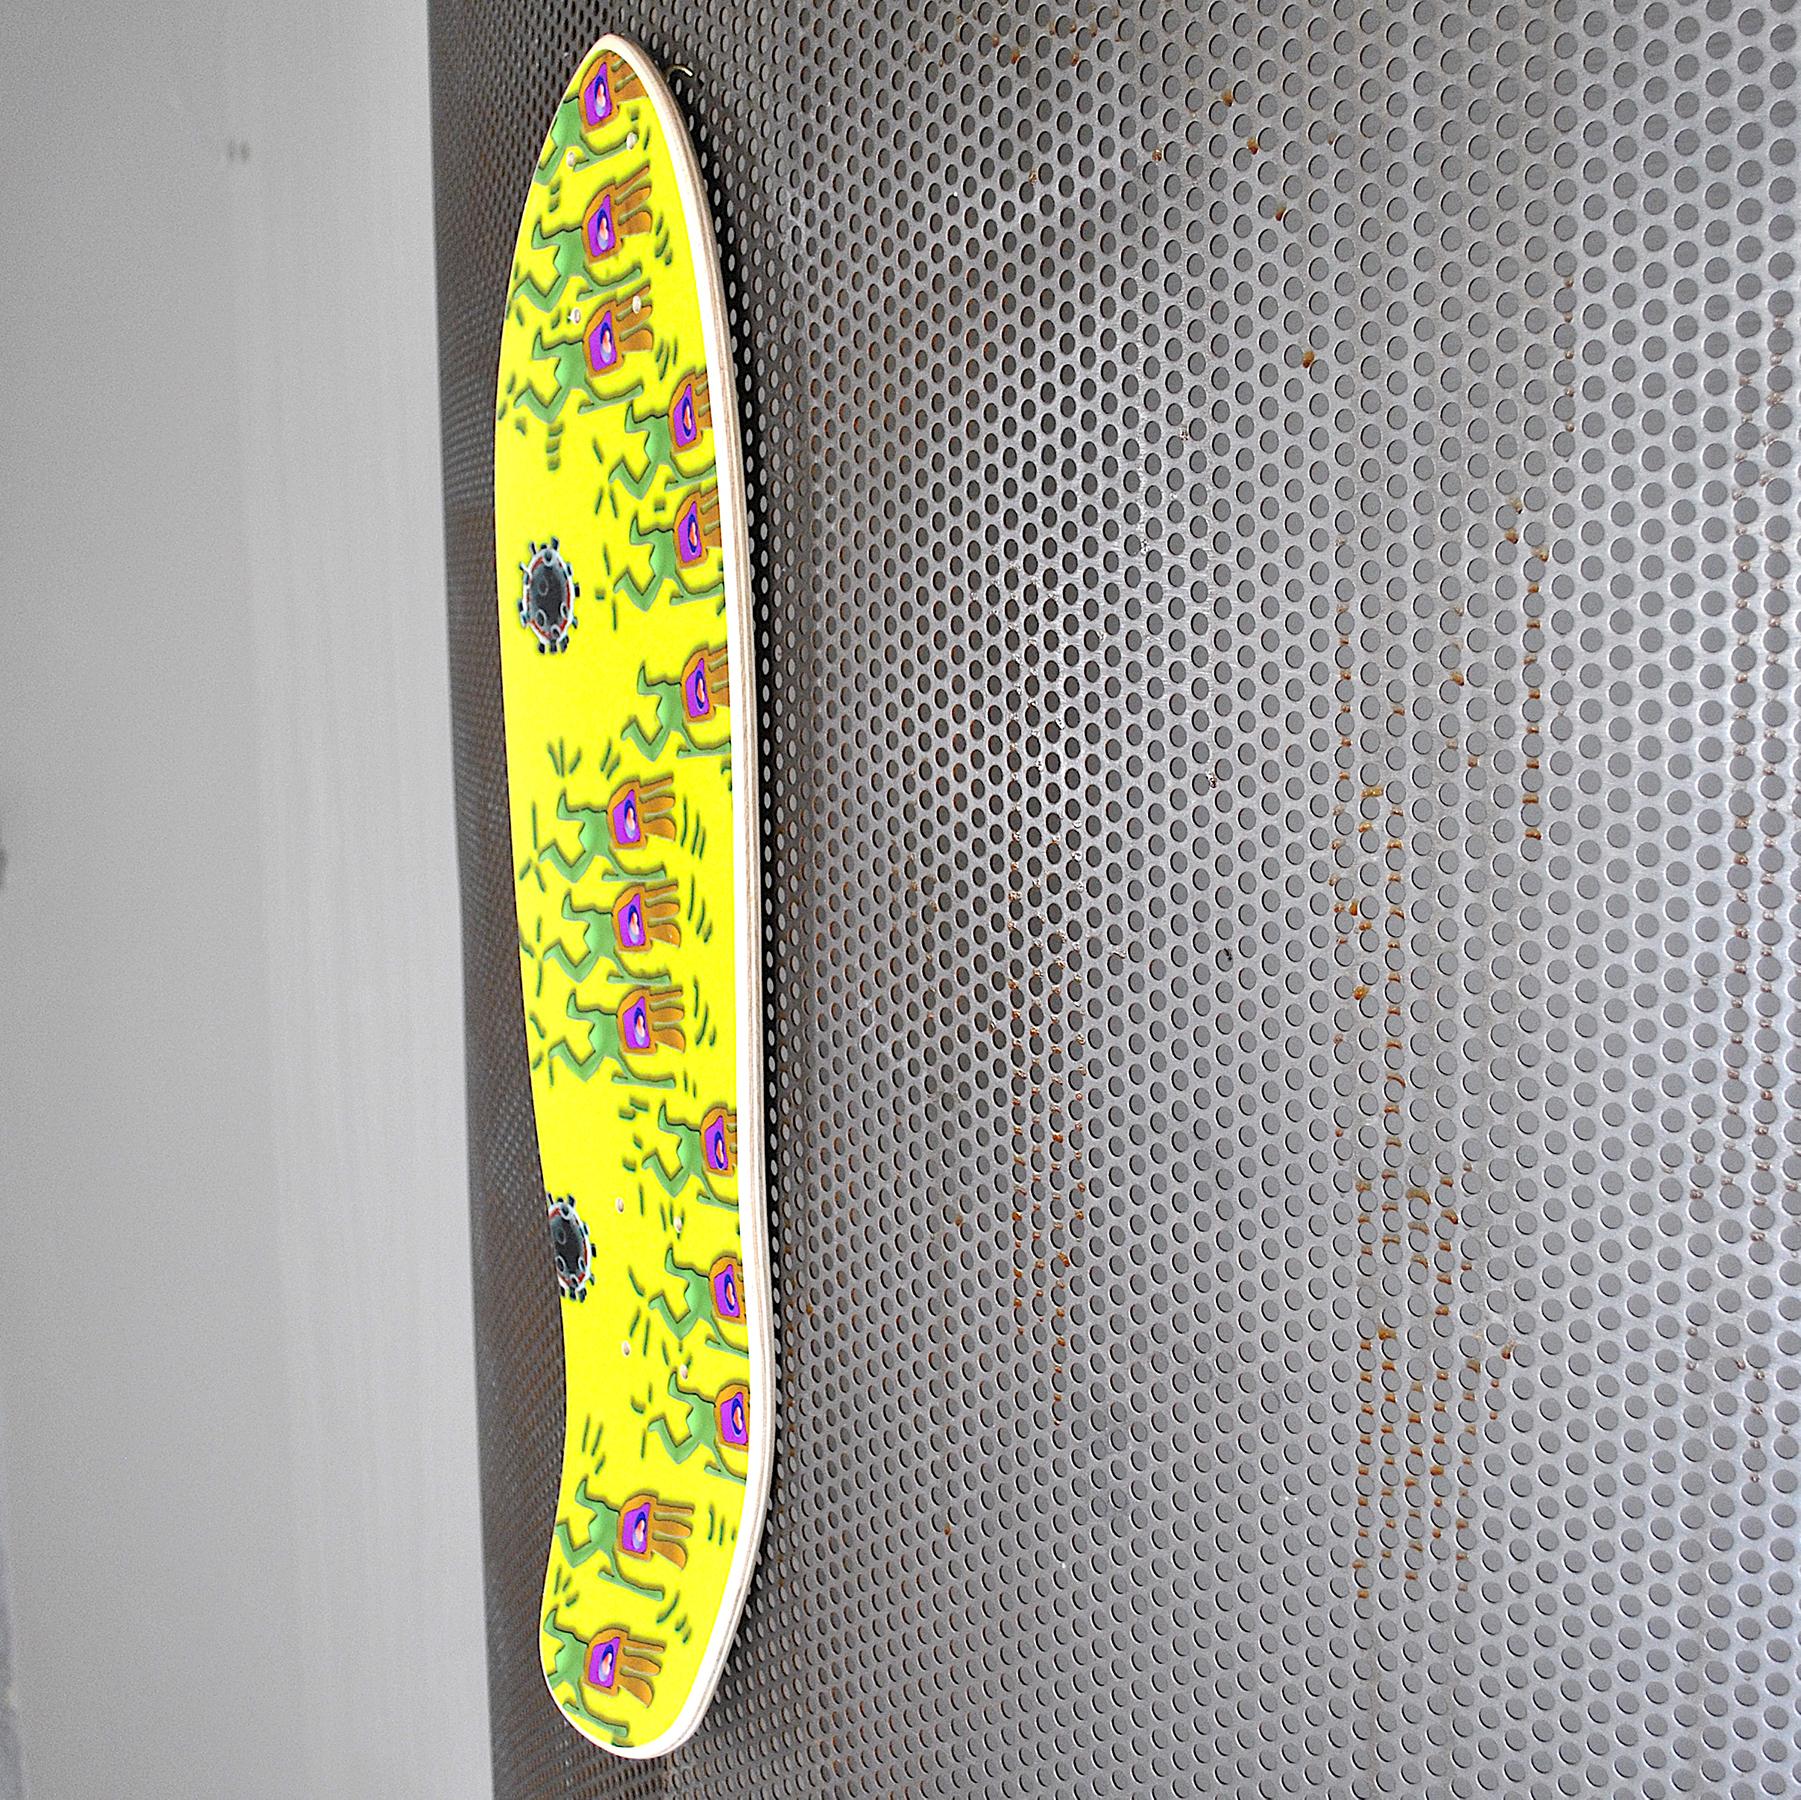 Italian Skate Deck Handmade in Italy Limited Edition by Pio Schena